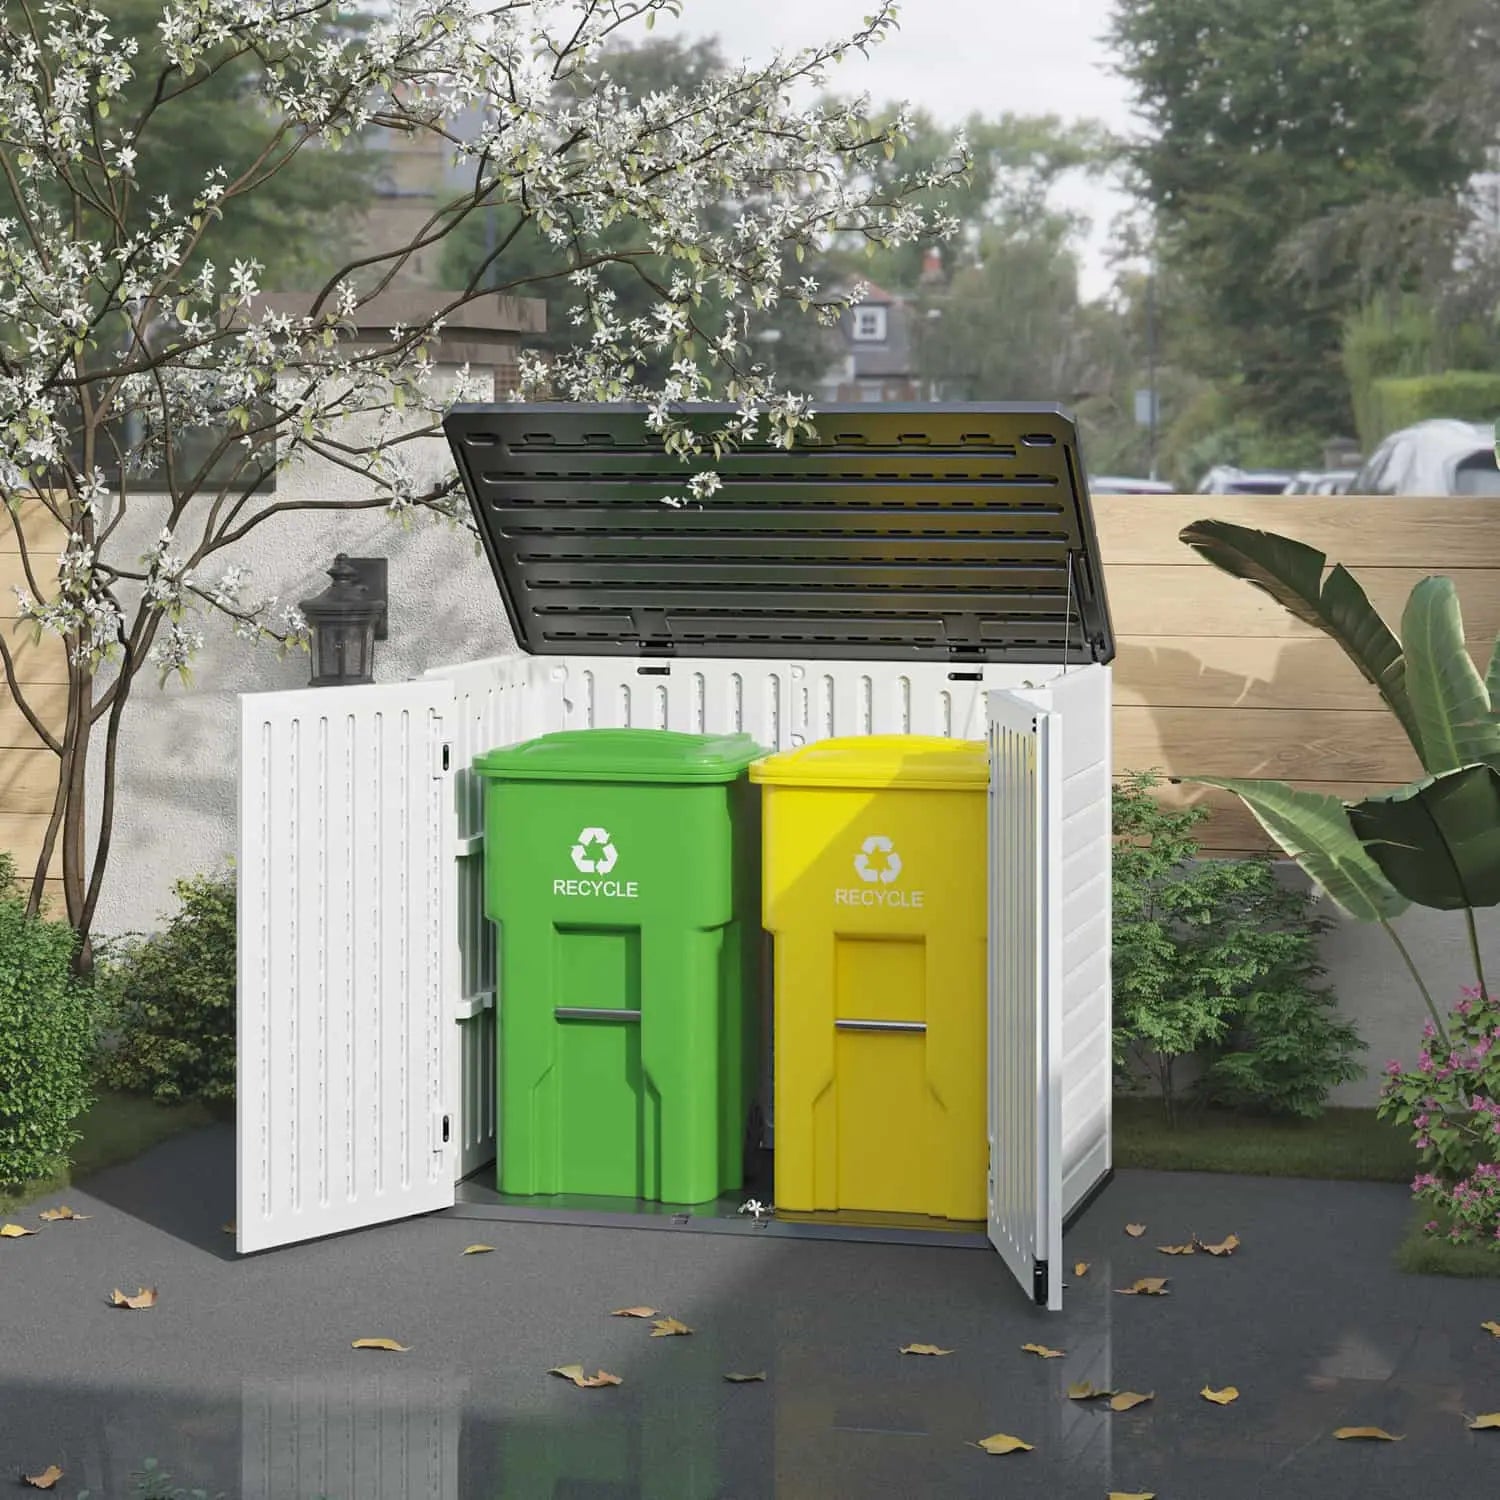 Patiowell 4x2 Plastic Shed Pro